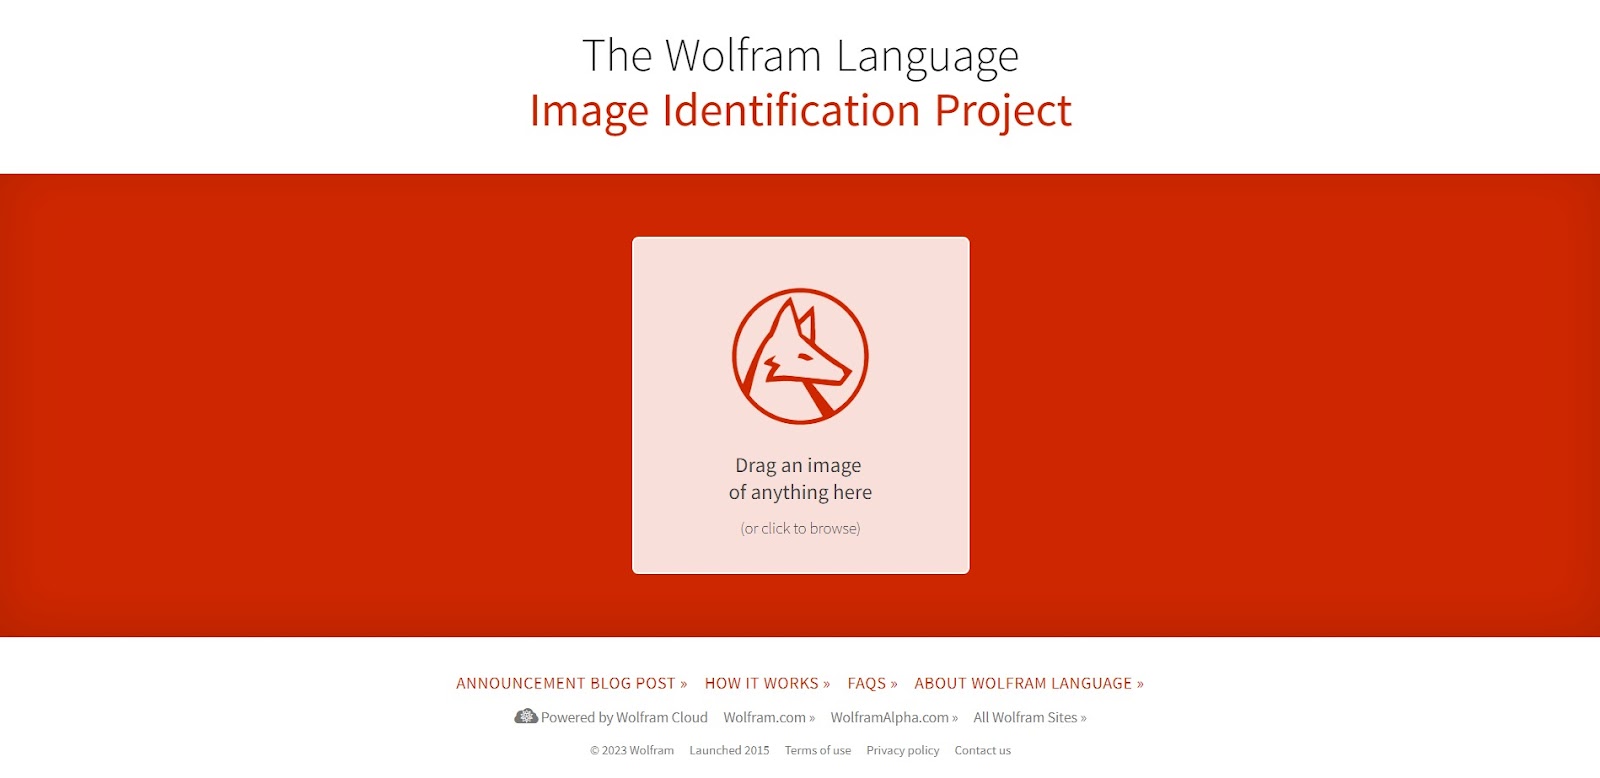 A screenshot of Image Identification Project's website